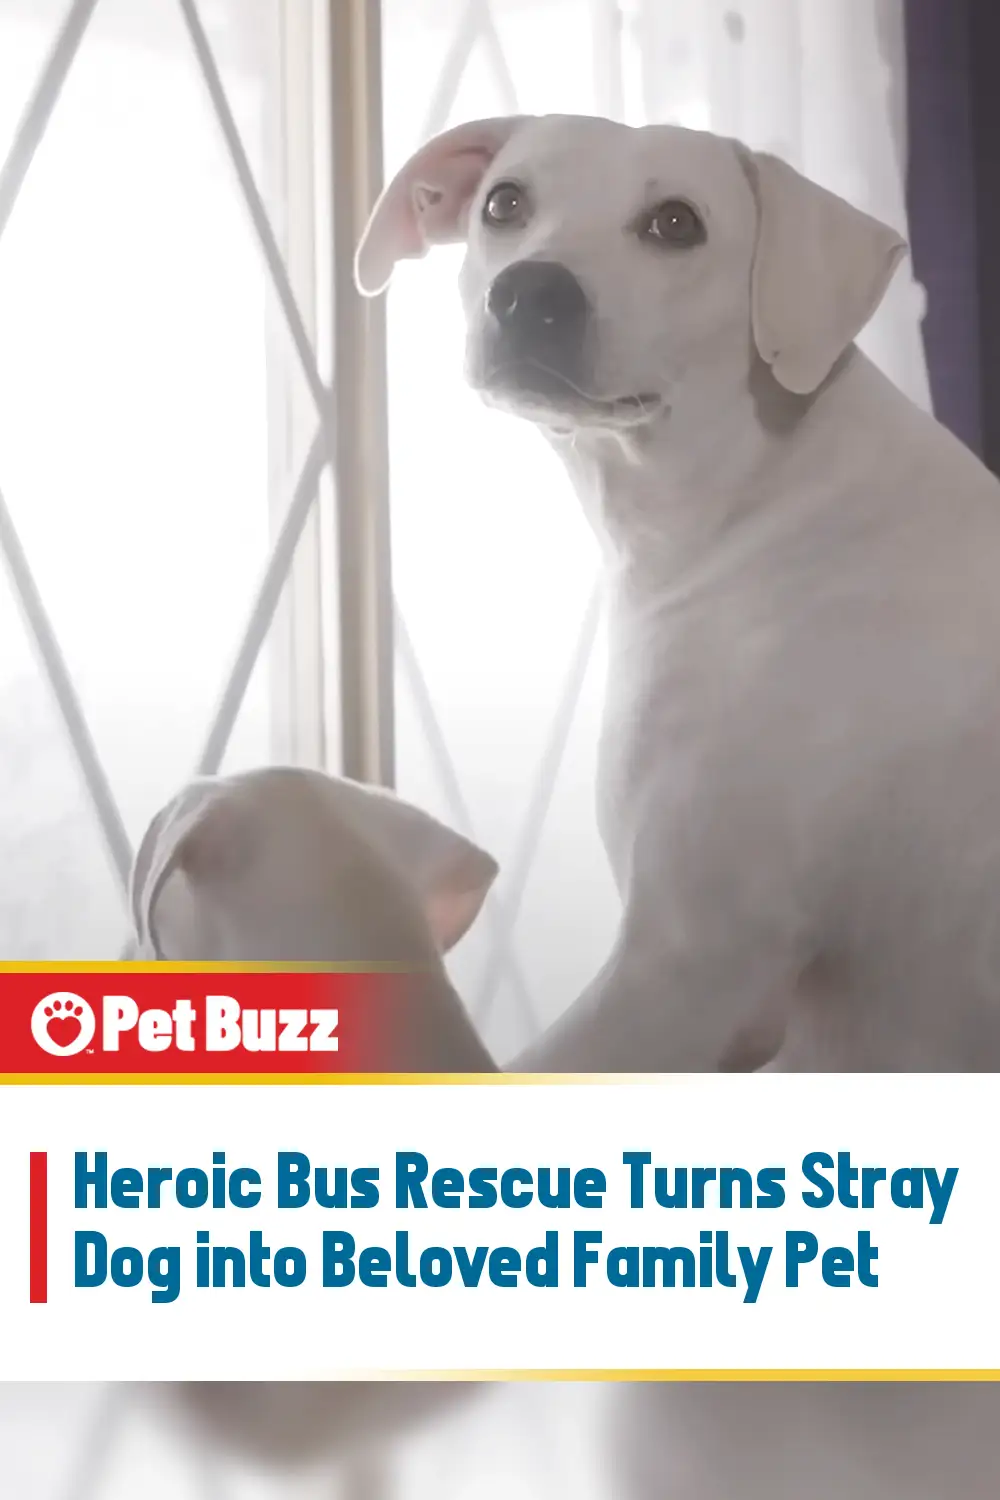 Heroic Bus Rescue Turns Stray Dog into Beloved Family Pet